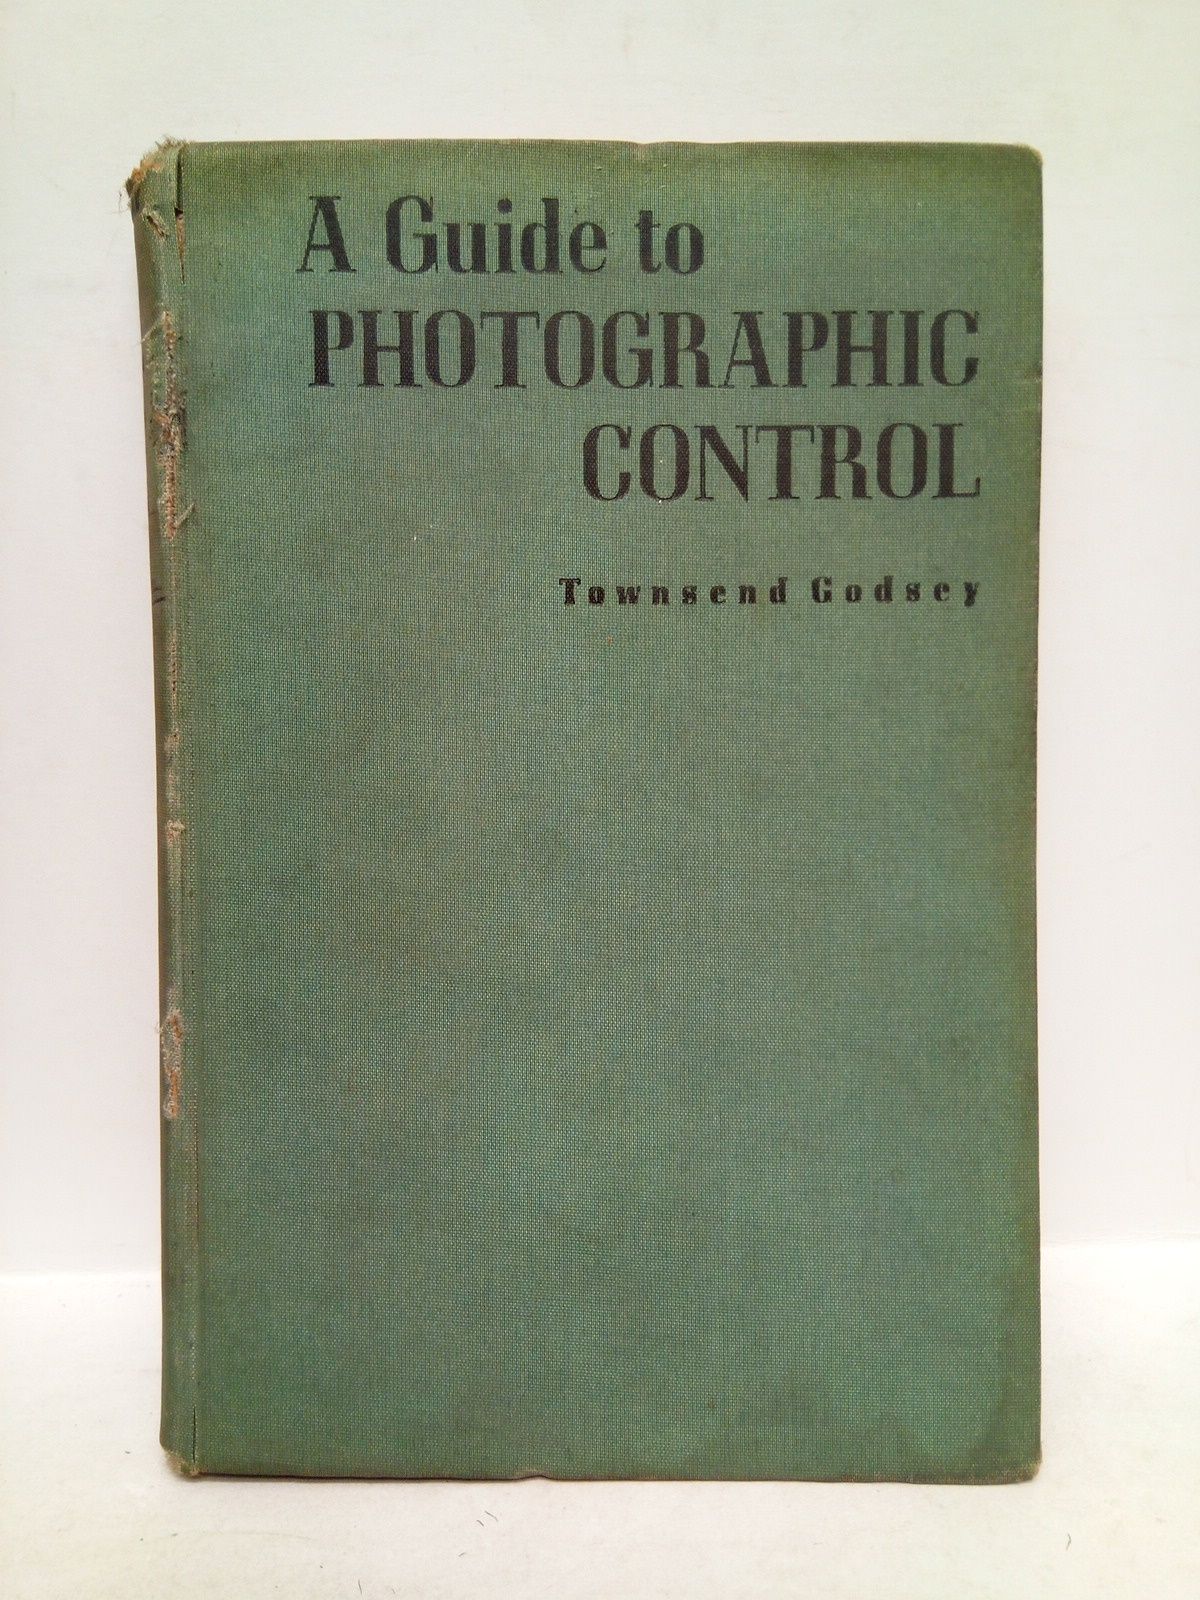 GODSEY, Townsend - A Guide to Photographic Control